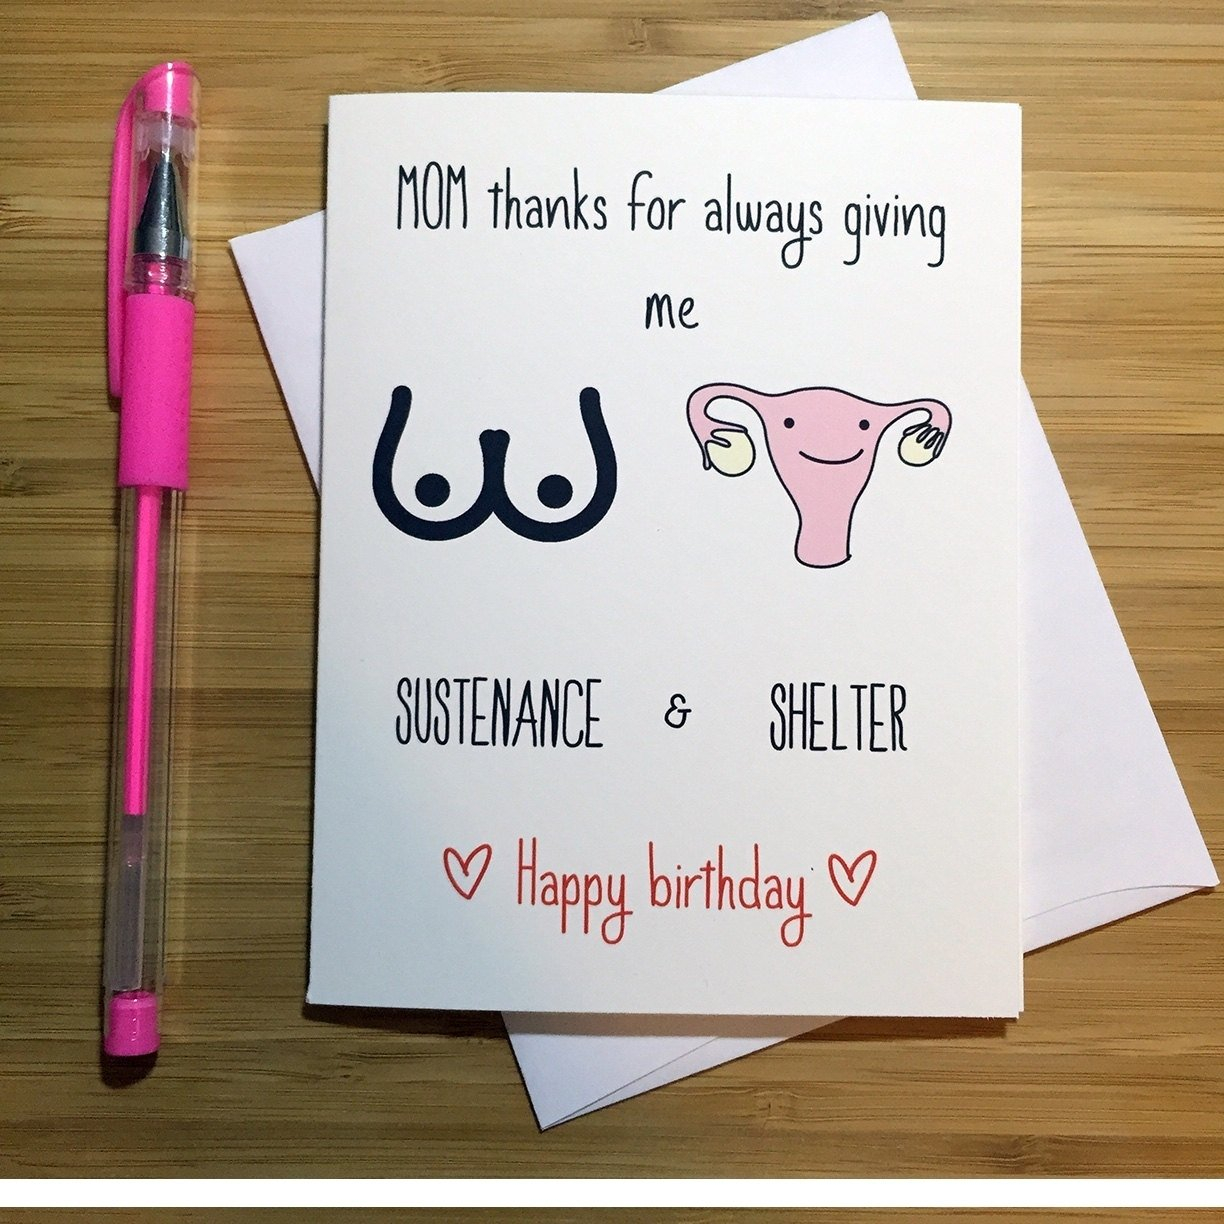 Unique Birthday Card Ideas 10 Beautiful Dad Birthday Gift Ideas From Daughter 2019